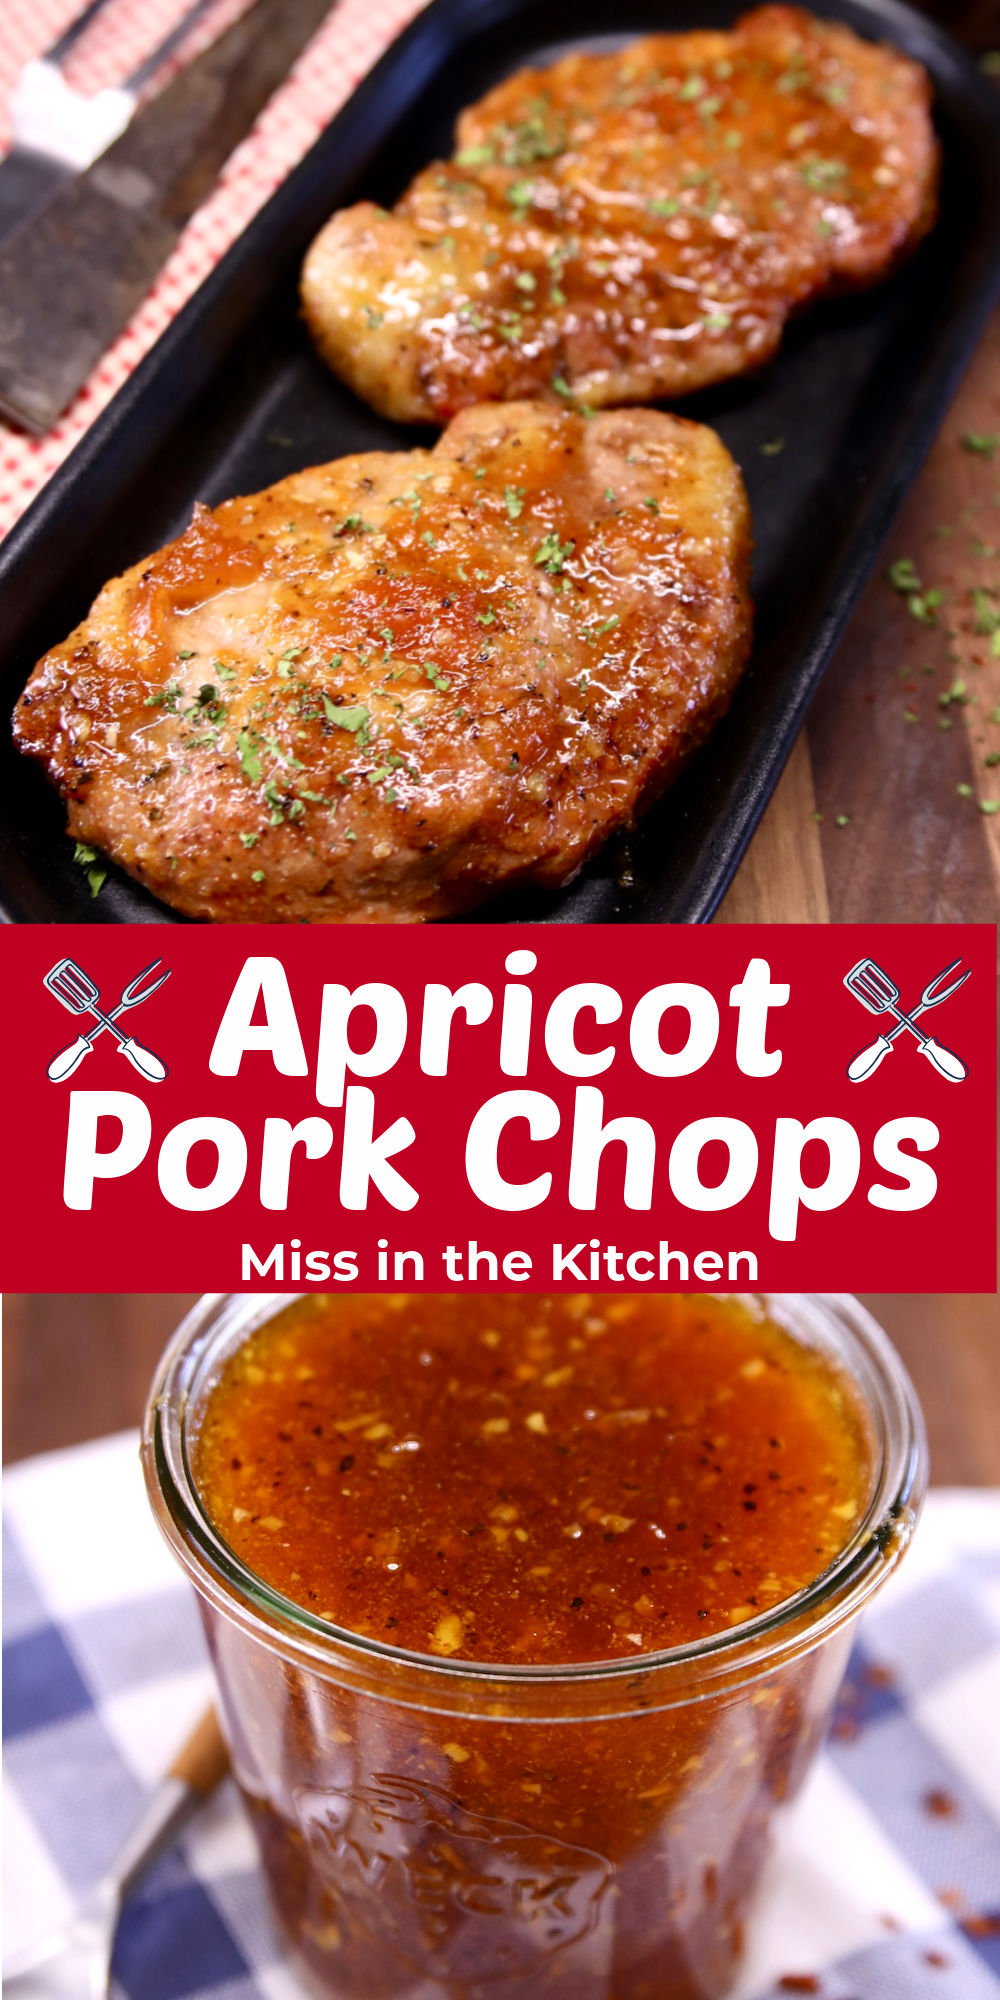 Apricot Pork Chops {Grilled or Baked} - Miss in the Kitchen